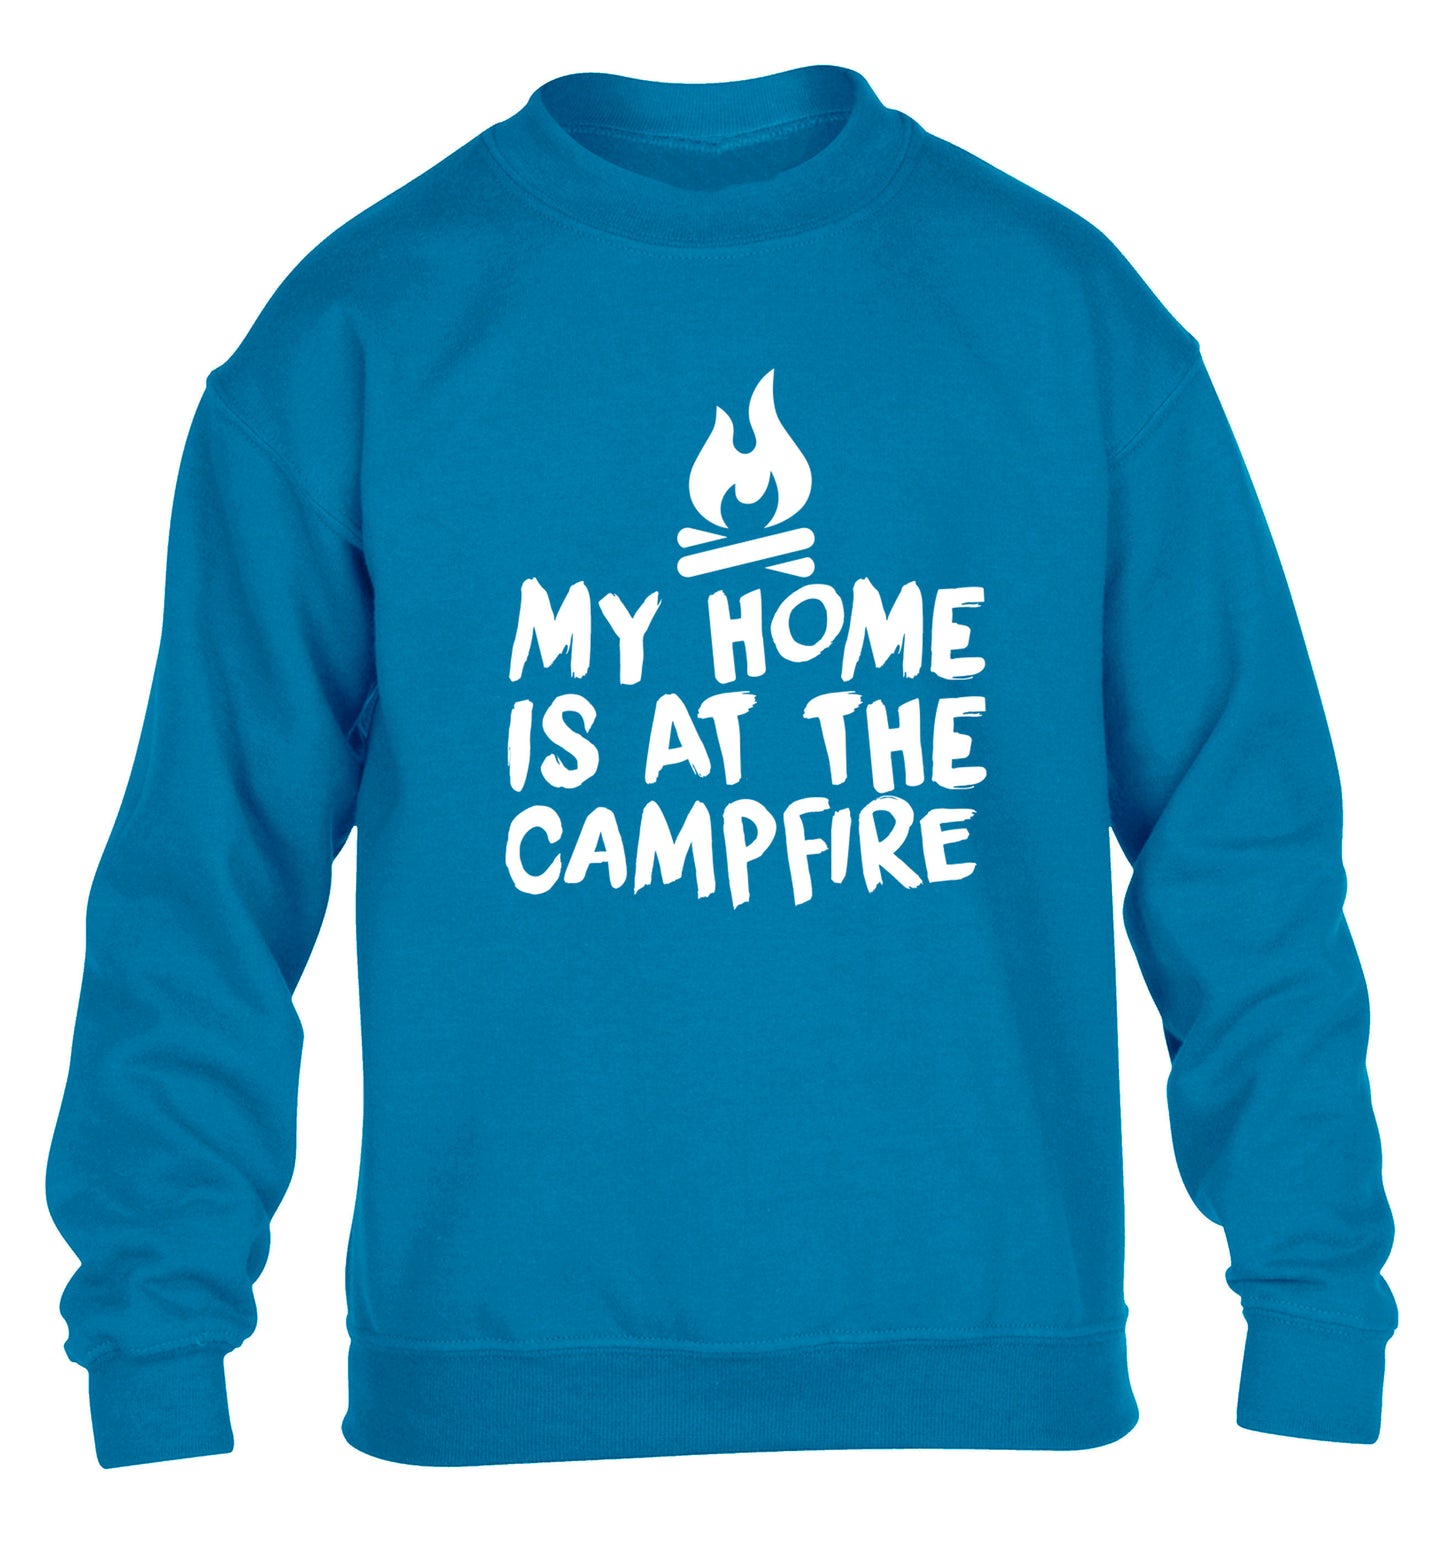 My home is at the campfire children's blue sweater 12-14 Years